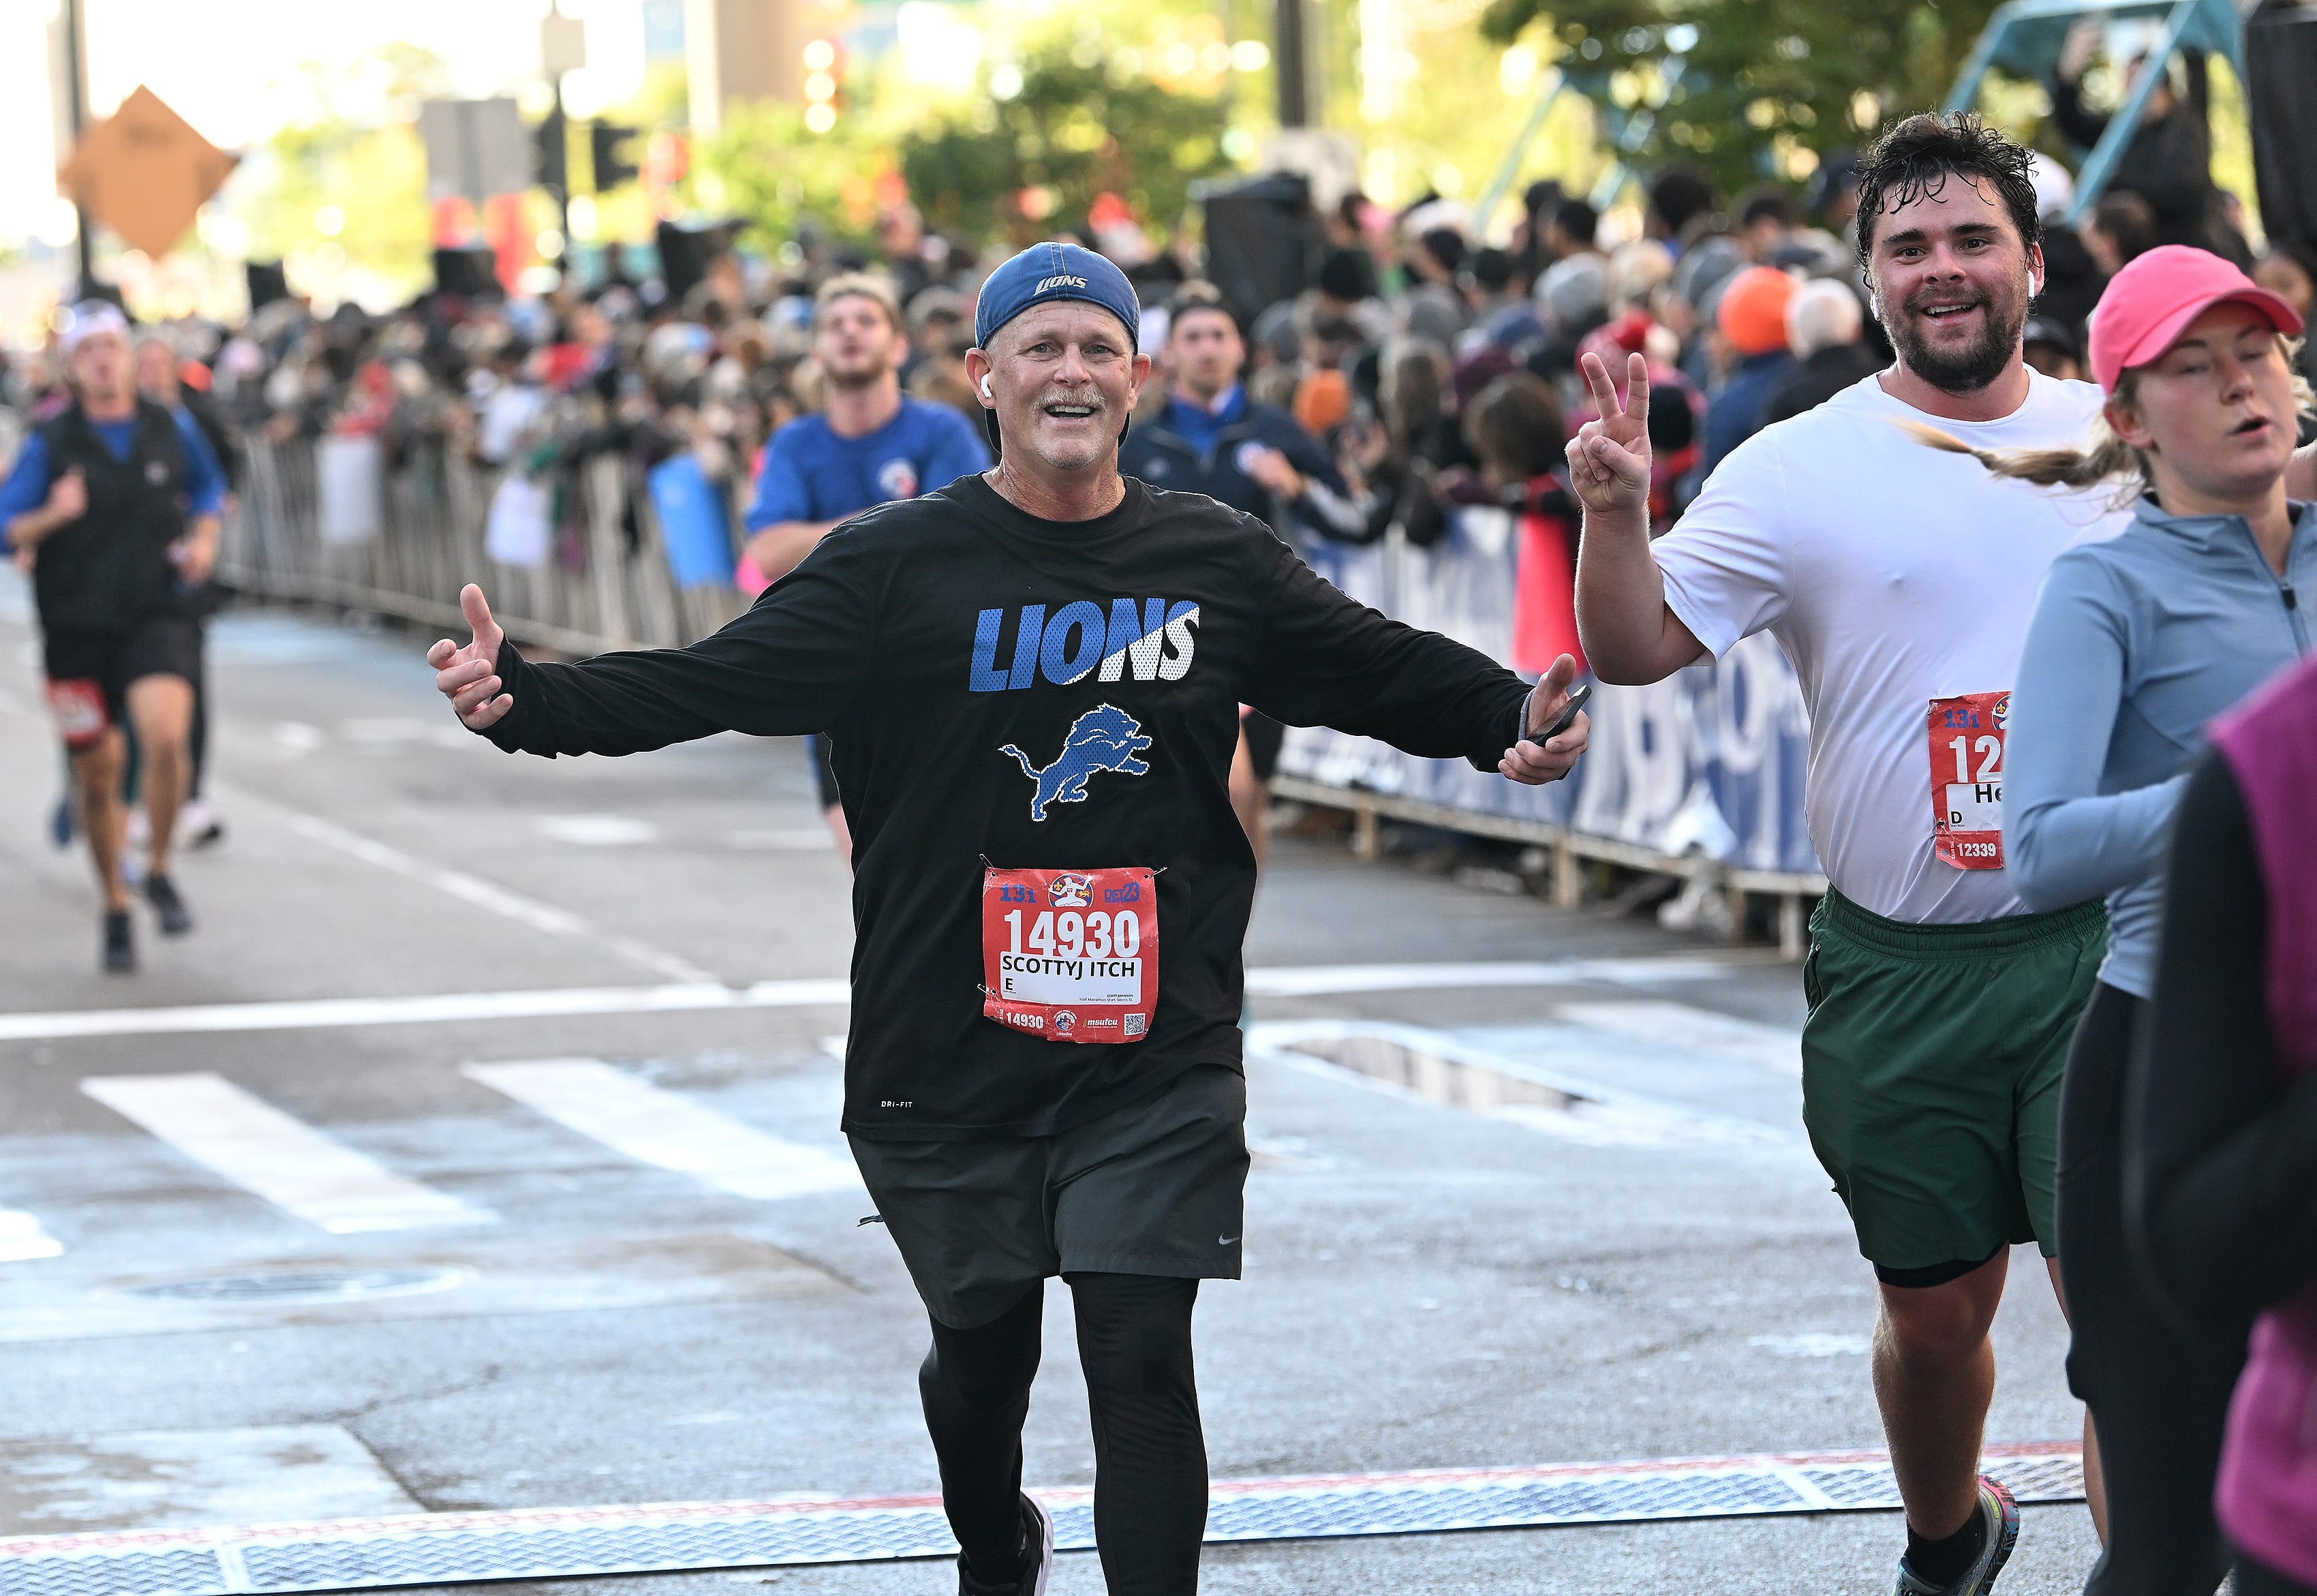 From left, Scott Johnson, 58, of Monroe and Henry Mikesell, 27, of Clawson react after finishing the half marathon at the Detroit Free Press Marathon in Detroit on Oct. 15, 2023.